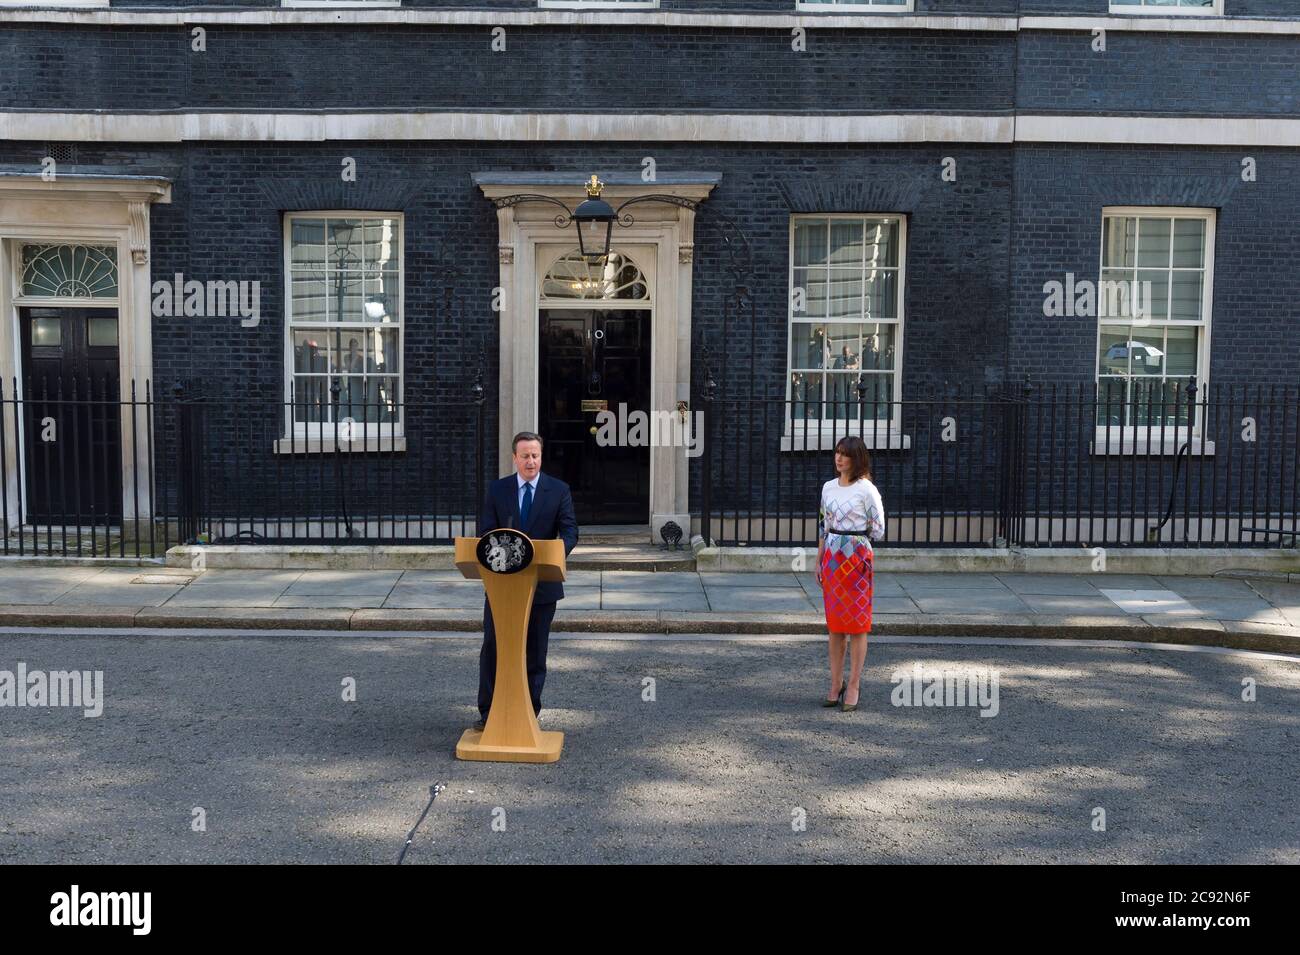 British Prime Minister David Cameron with his wife Samantha, announcing he’ll be resigning as Prime Minster, after Britain voted to leave the European Union, in yesterdays referendum, outside, 10 Downing Street, London, UK.  24 Jun 2016 Stock Photo